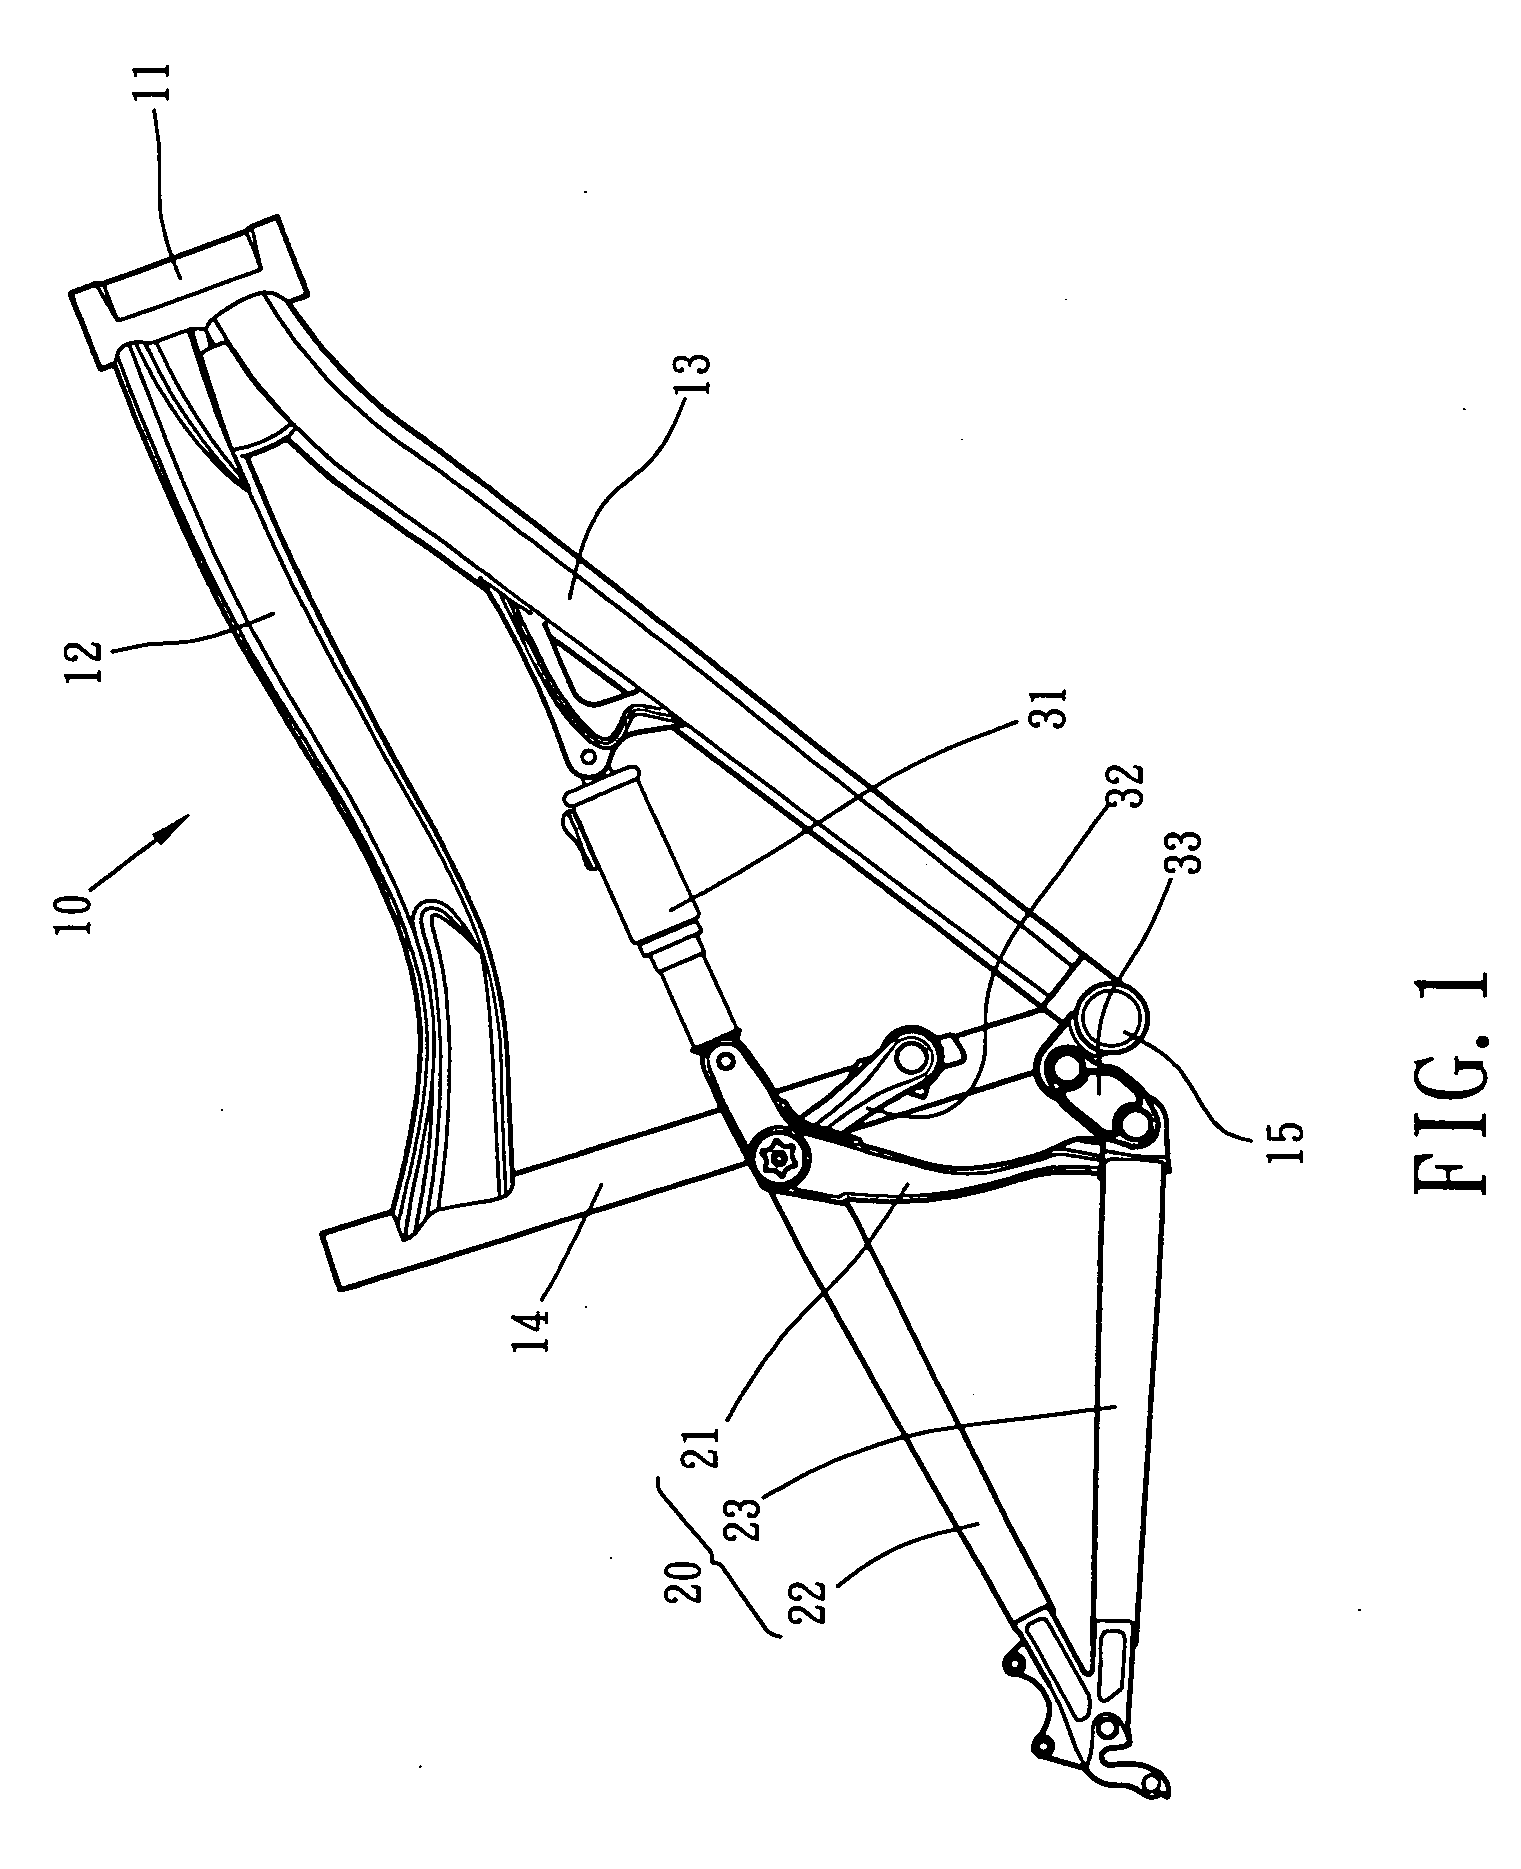 Bicycle suspension system employing highly predictable pedalling characteristics